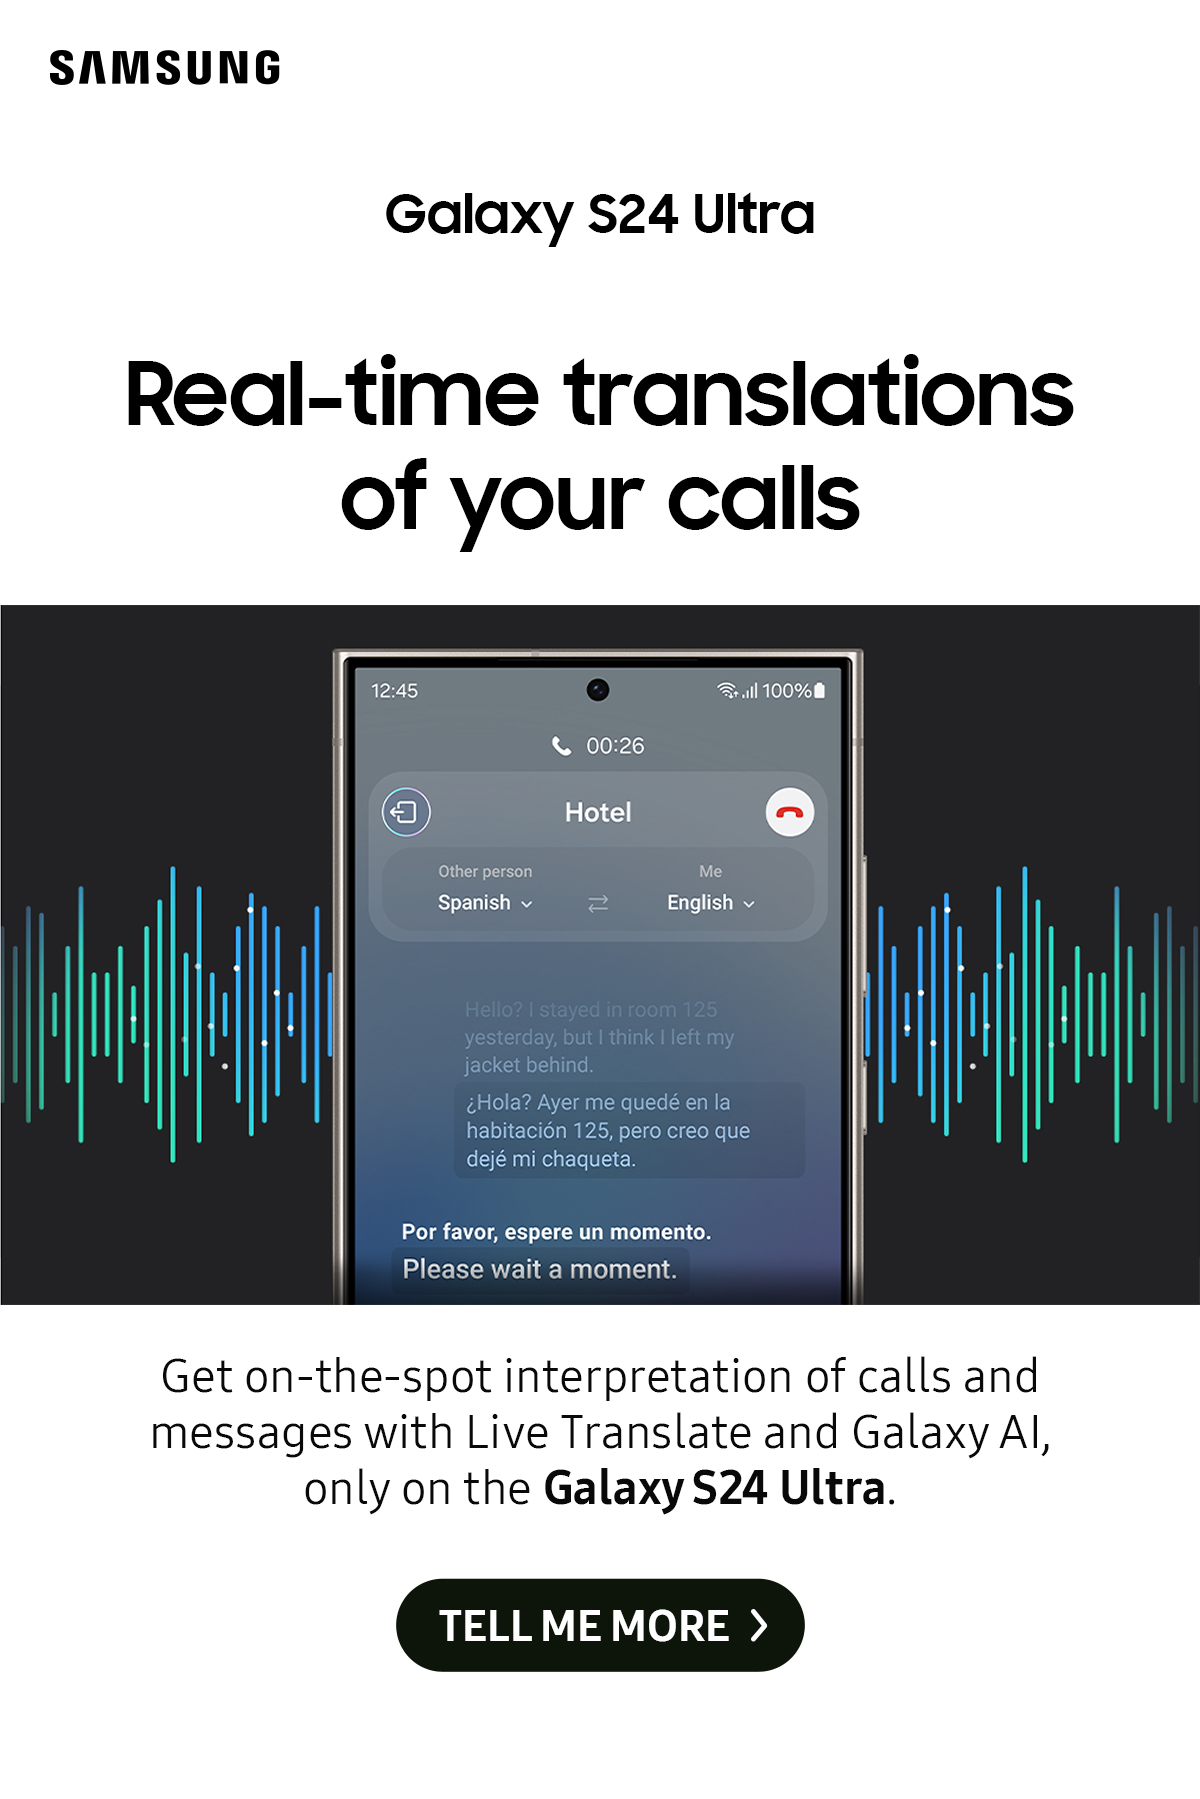 Real-time translations of your calls | Get on-the-spot interpretation of calls and messages with Live Translate and Galaxy Al on the Galaxy S24 Ultra.